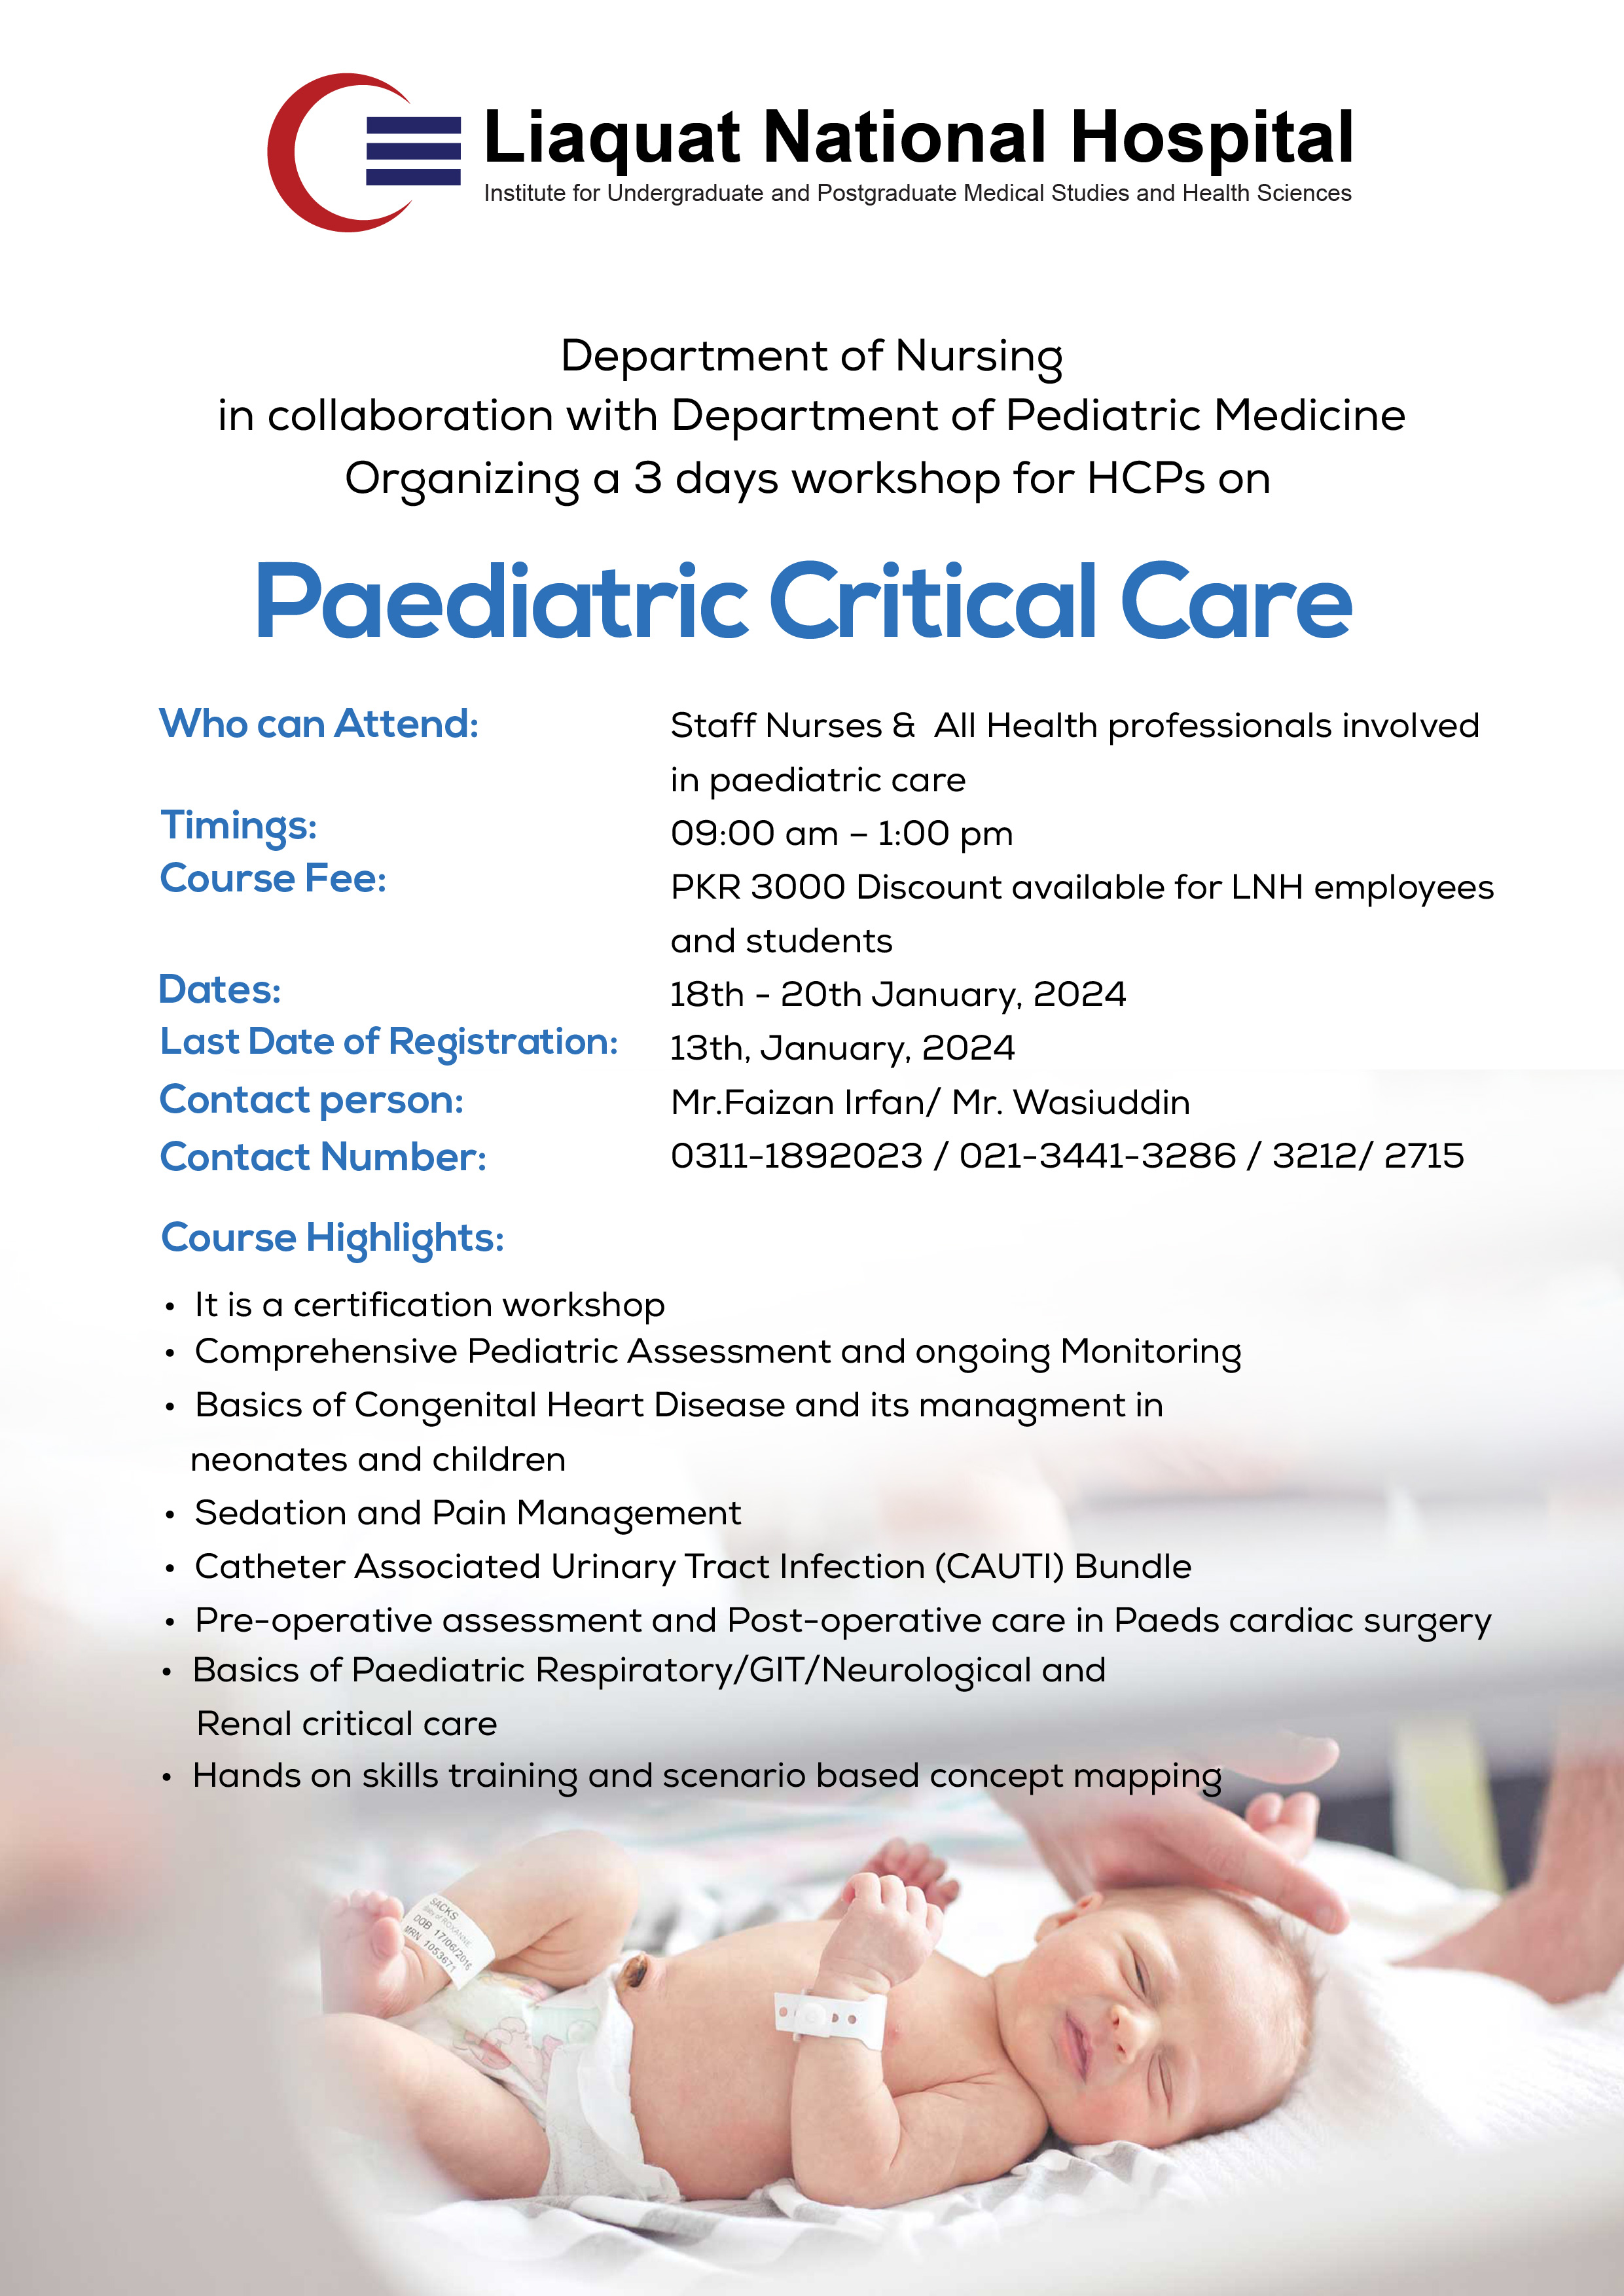 3 day workshop for HCPs on Paediatric Critical Care